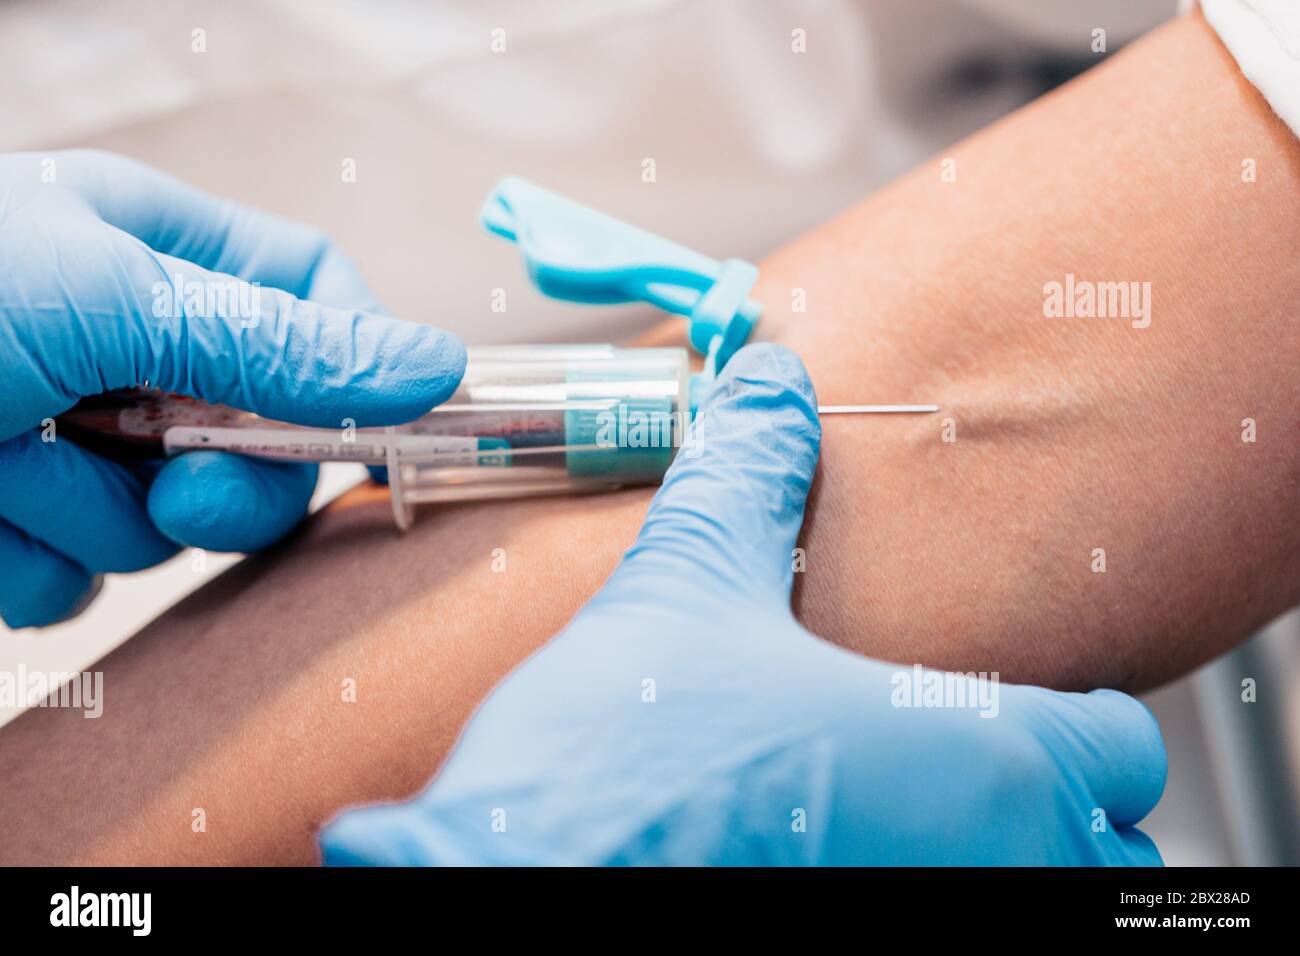 Plasma lifting - blood sampling from a vein to separate plasma in a centrifuge Stock Photo